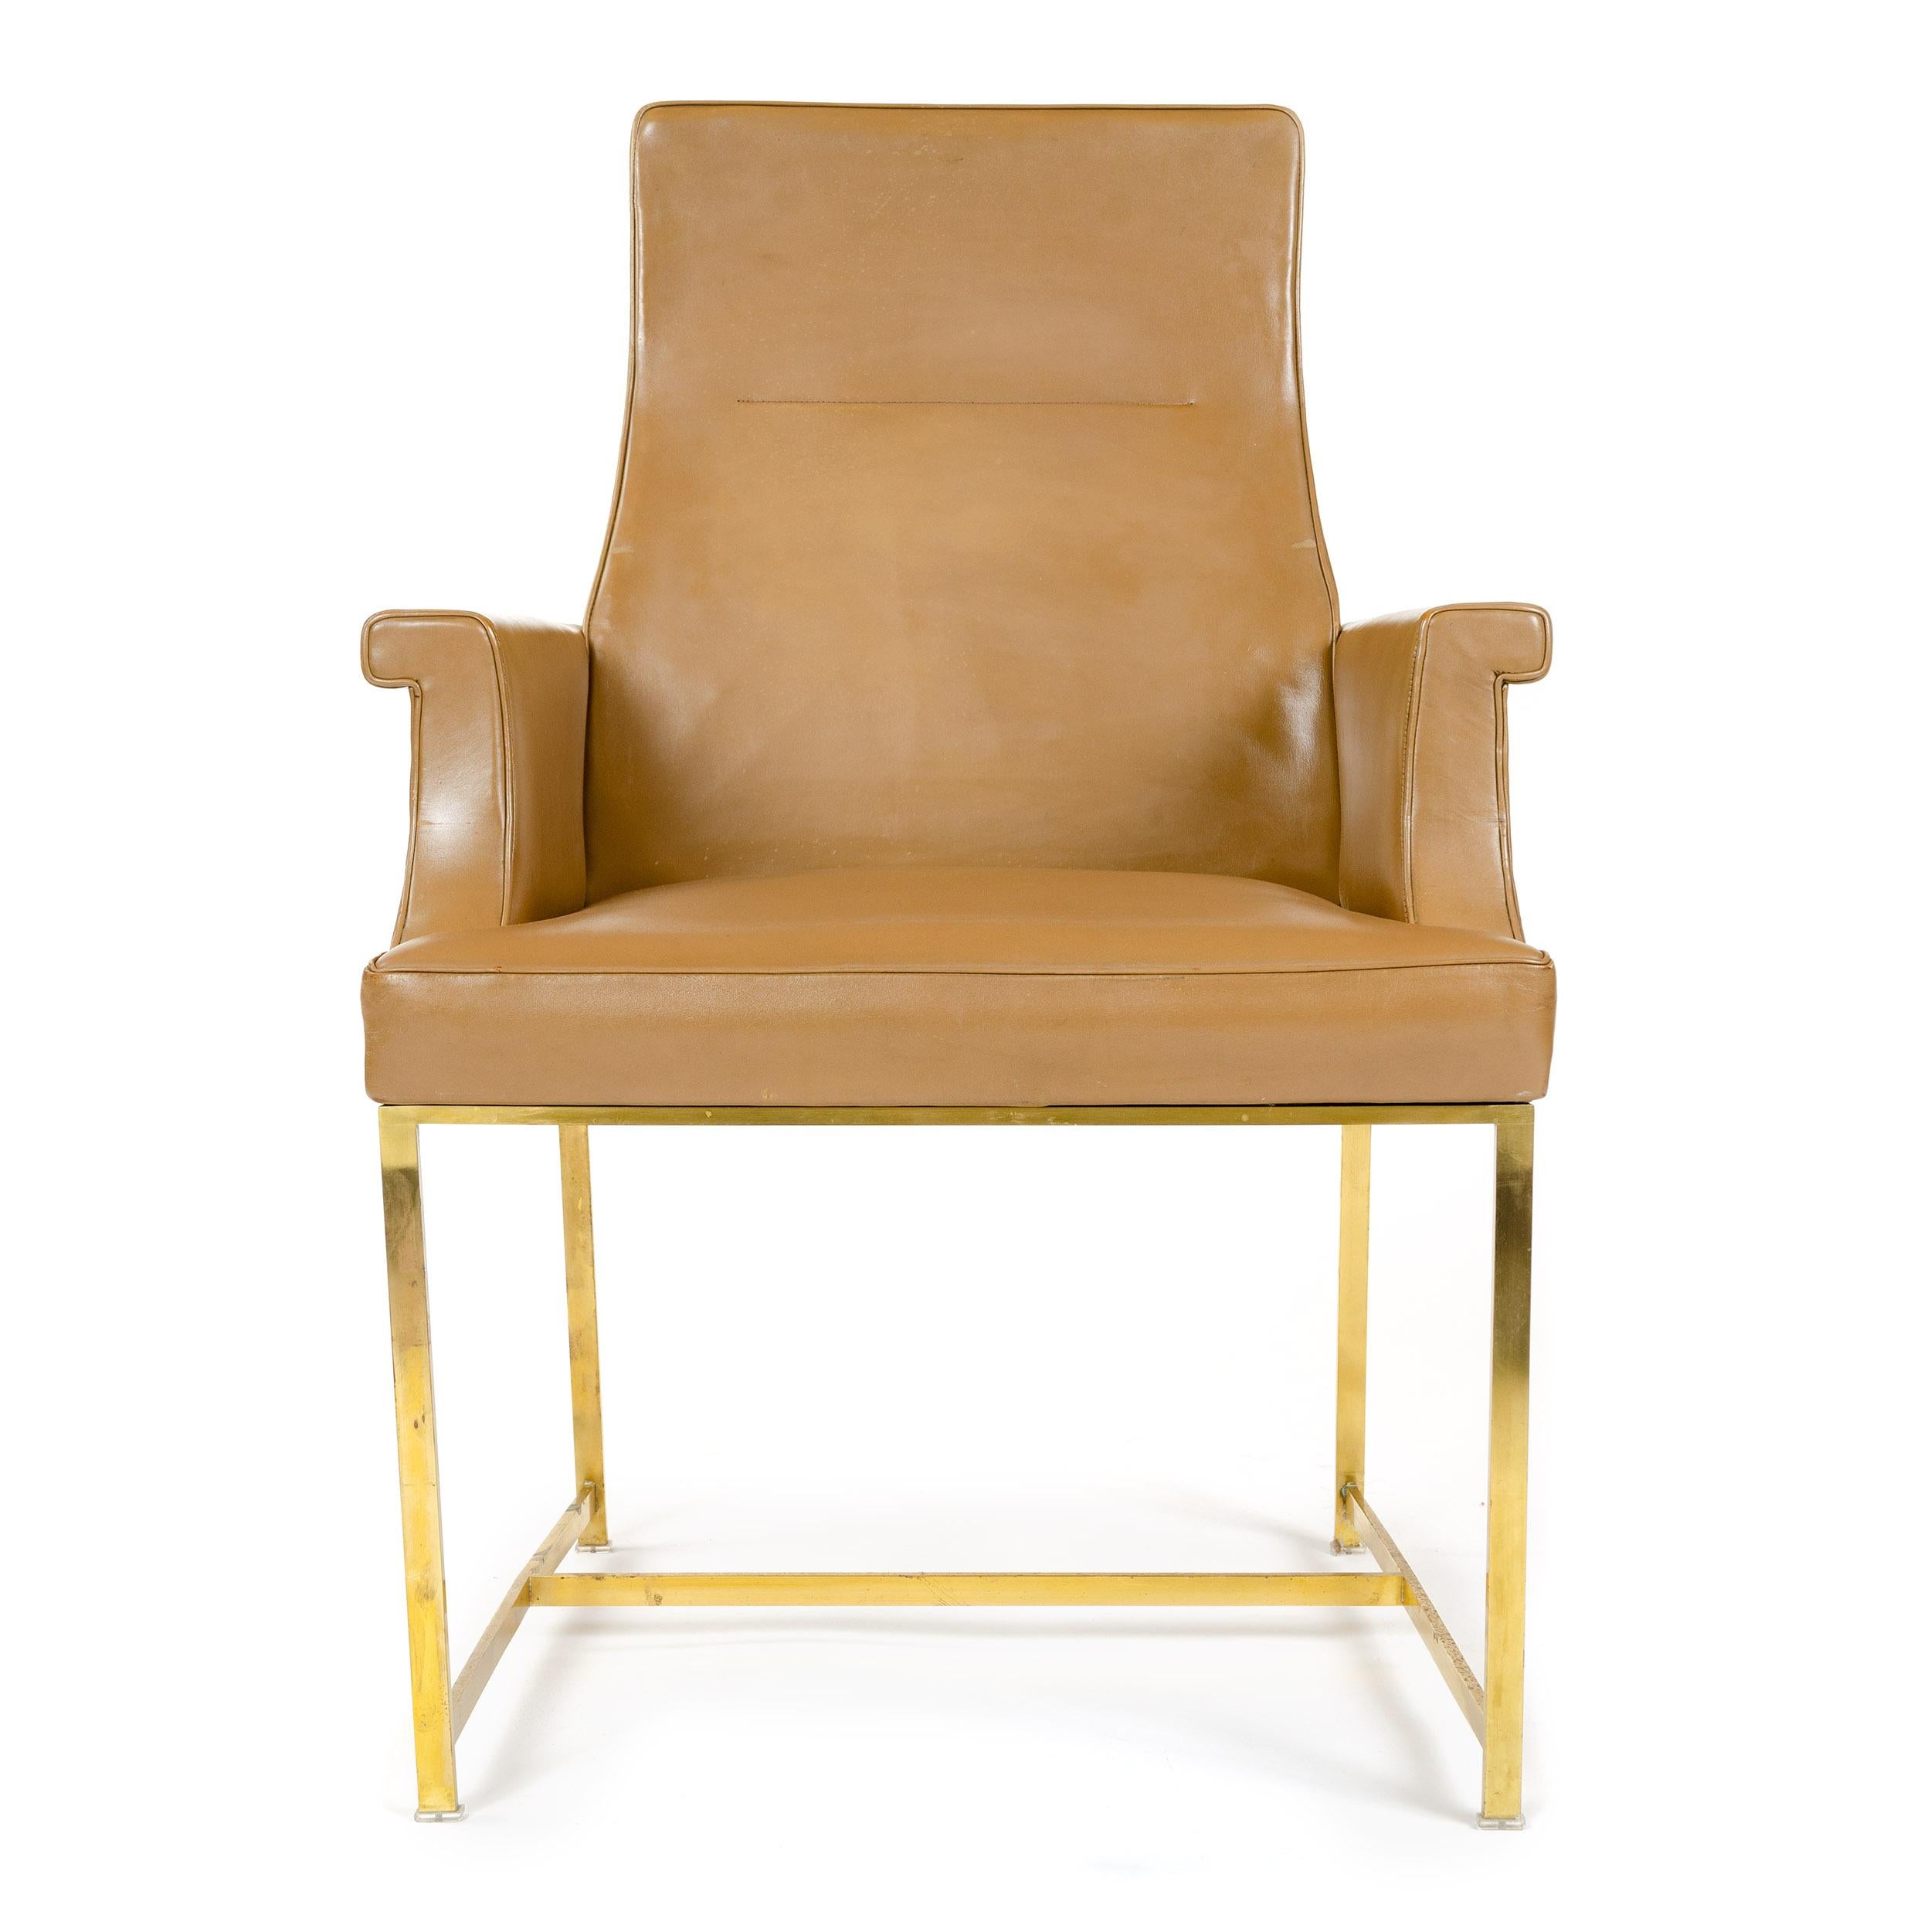 A high back armchair with the original tan leather upholstery and a solid brass base.